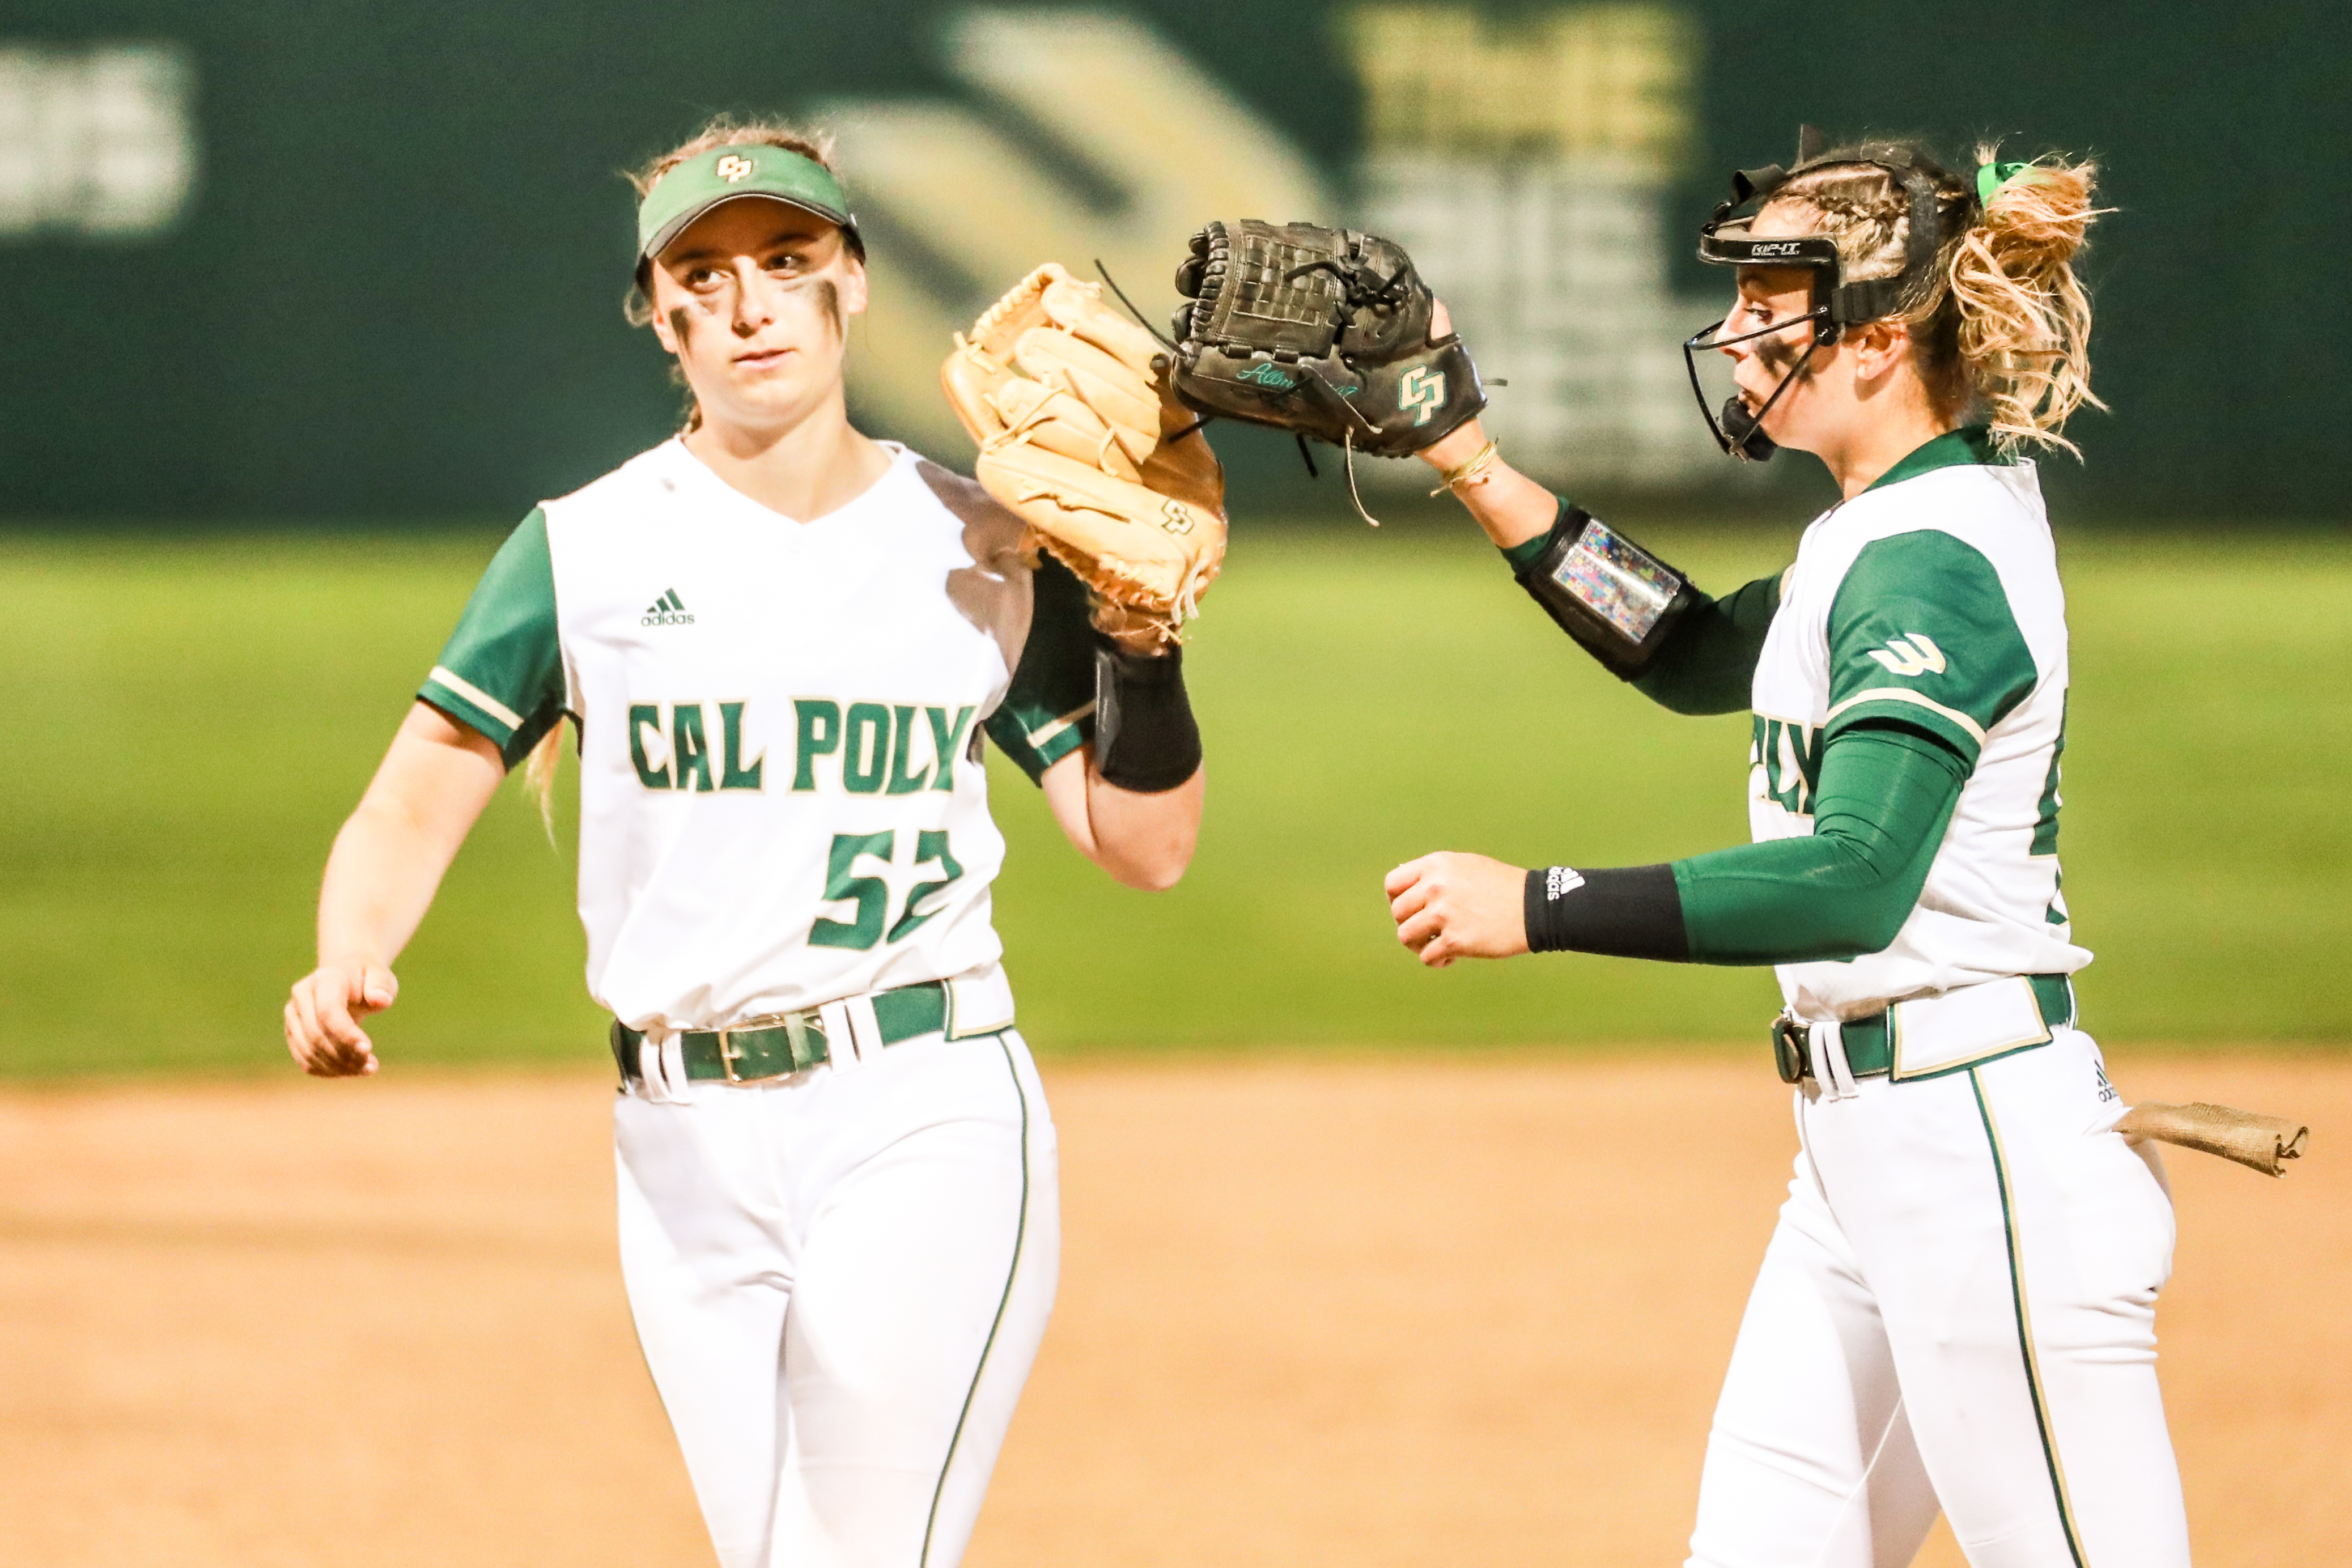 Two sisters wearing Cal Poly softball uniforms high five on the field during a game.